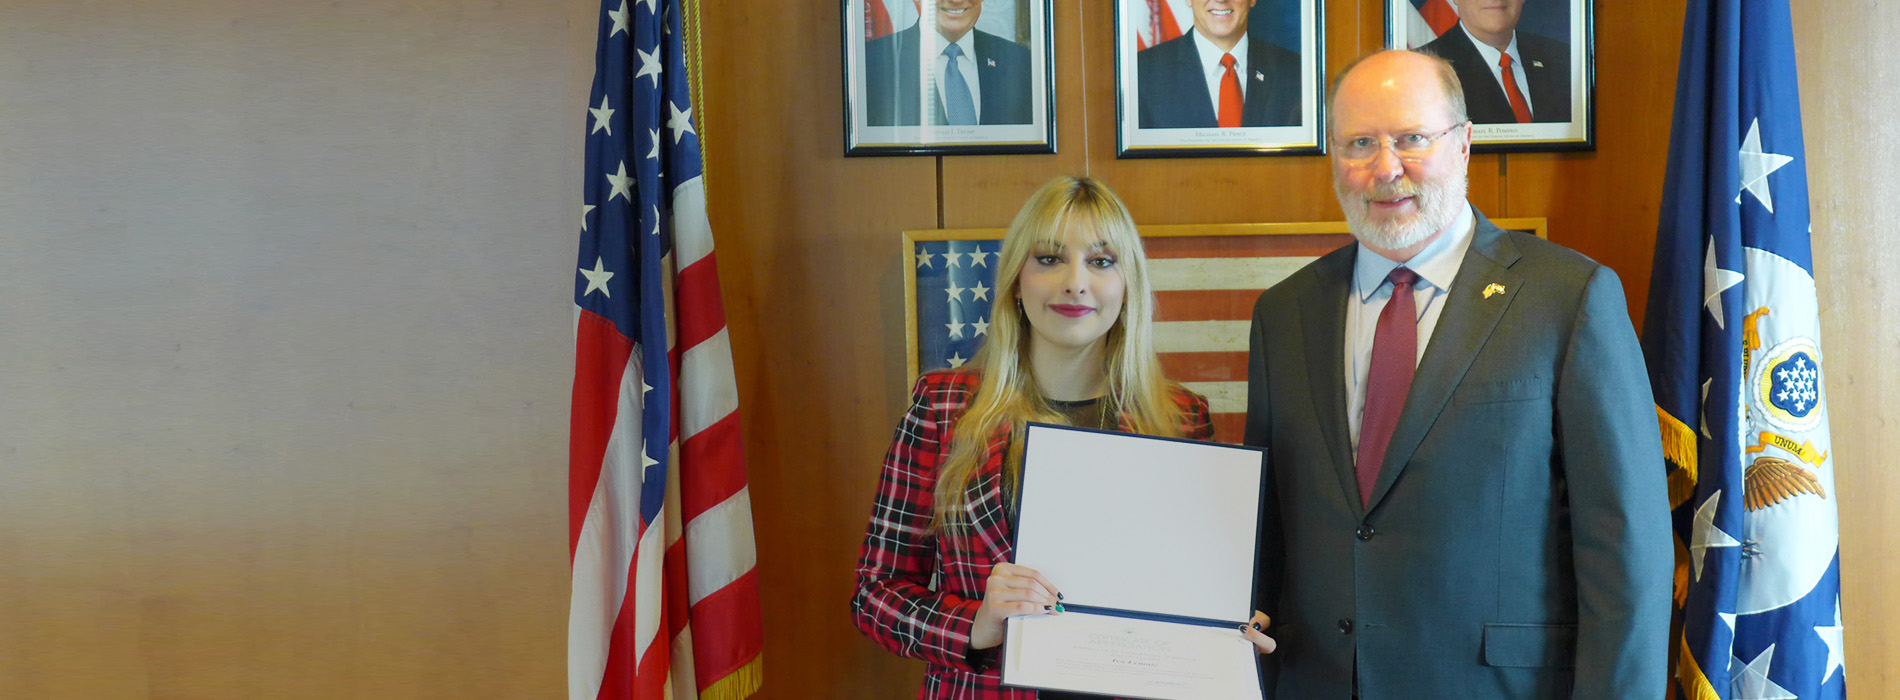 Image for Internship at U.S. Embassy: our student Iva Lemaić gives us the scoop